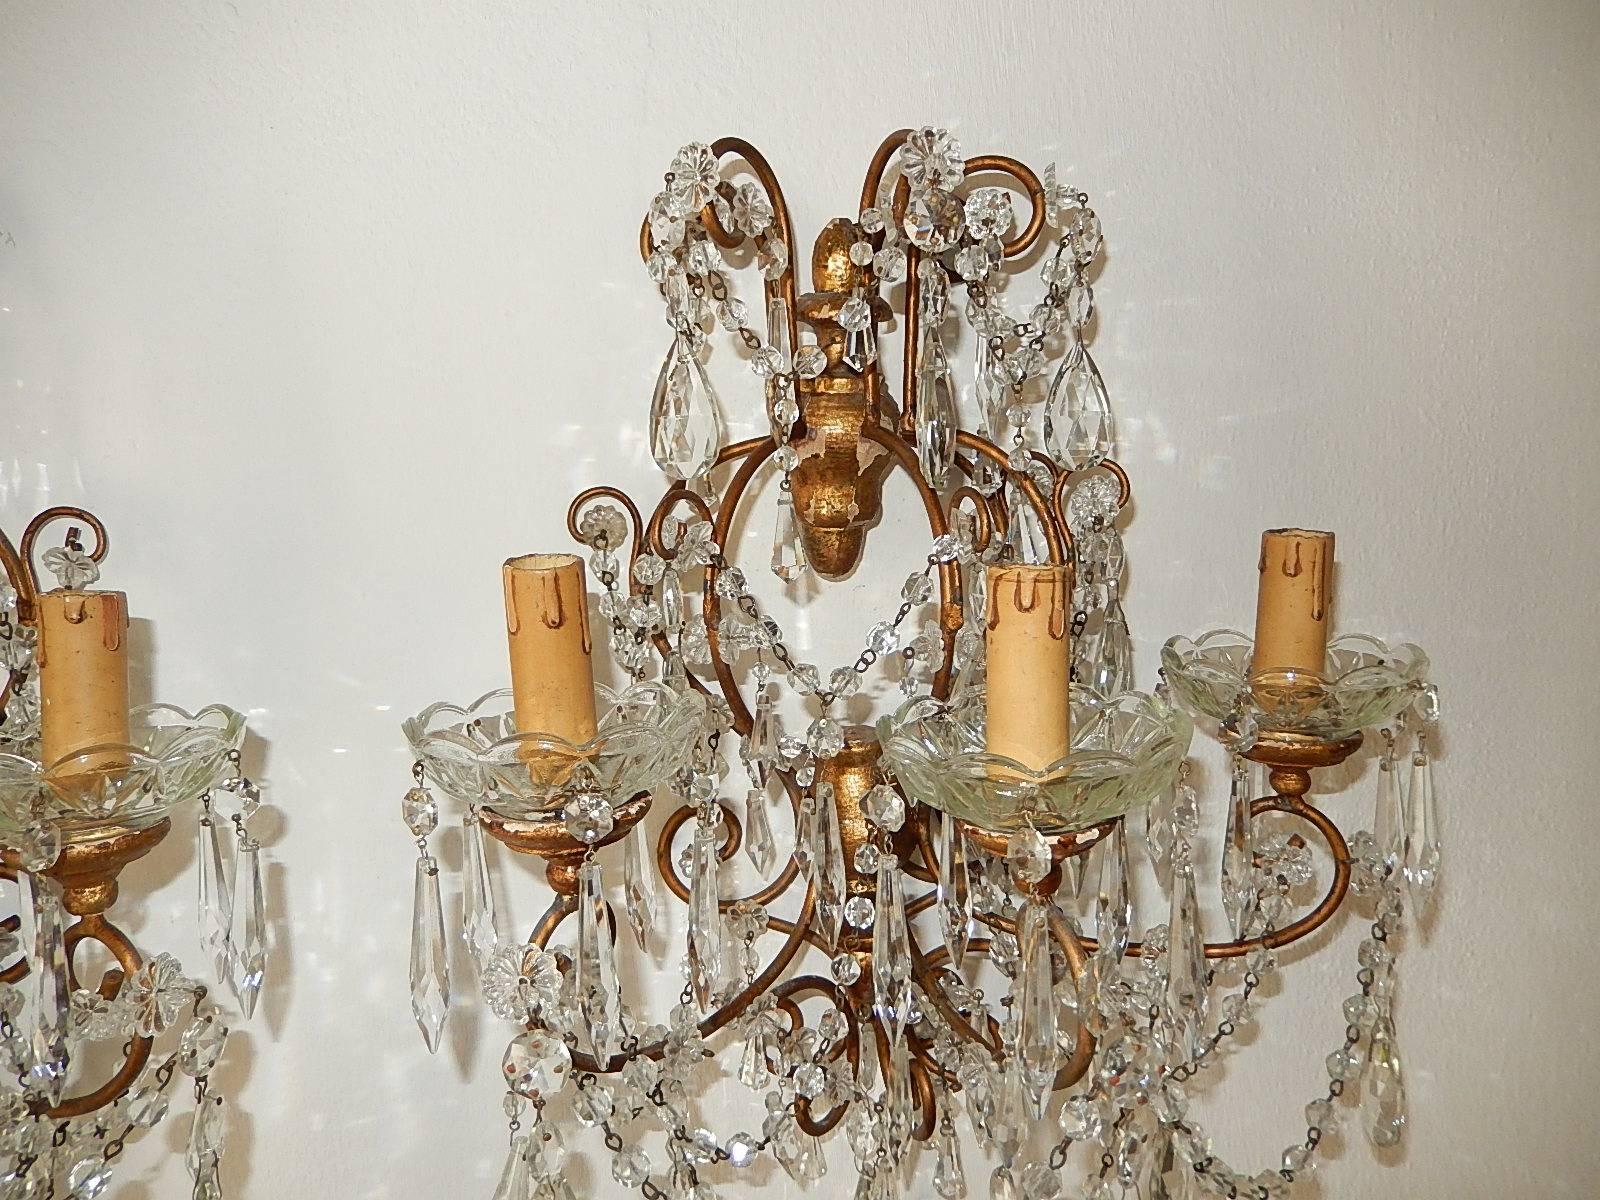 Early 20th Century 1900 French Baroque Gold Gilt Three-Light Crystal Sconces For Sale